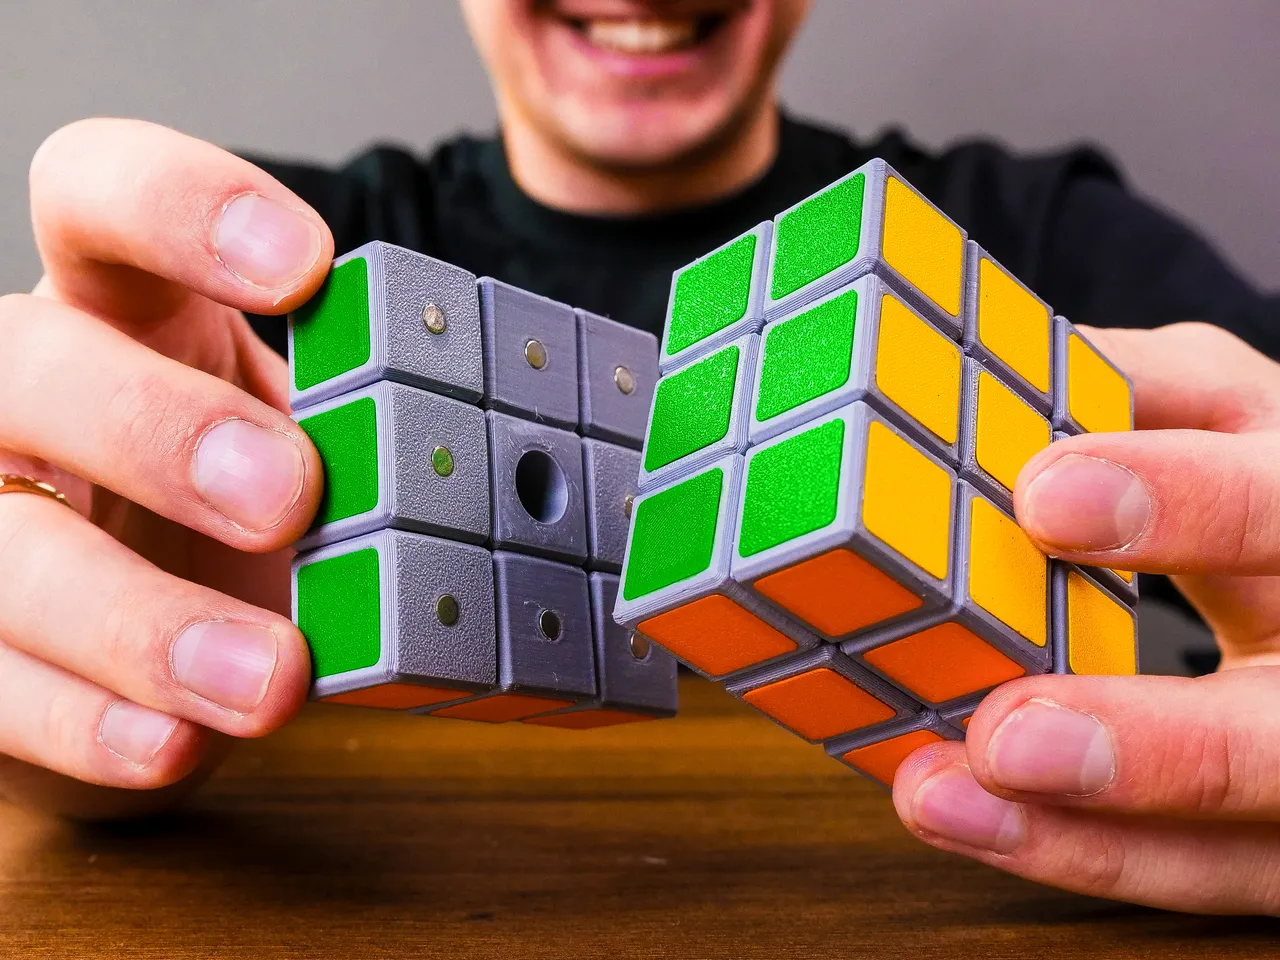 Clear Rubik's Cubes with Magnets